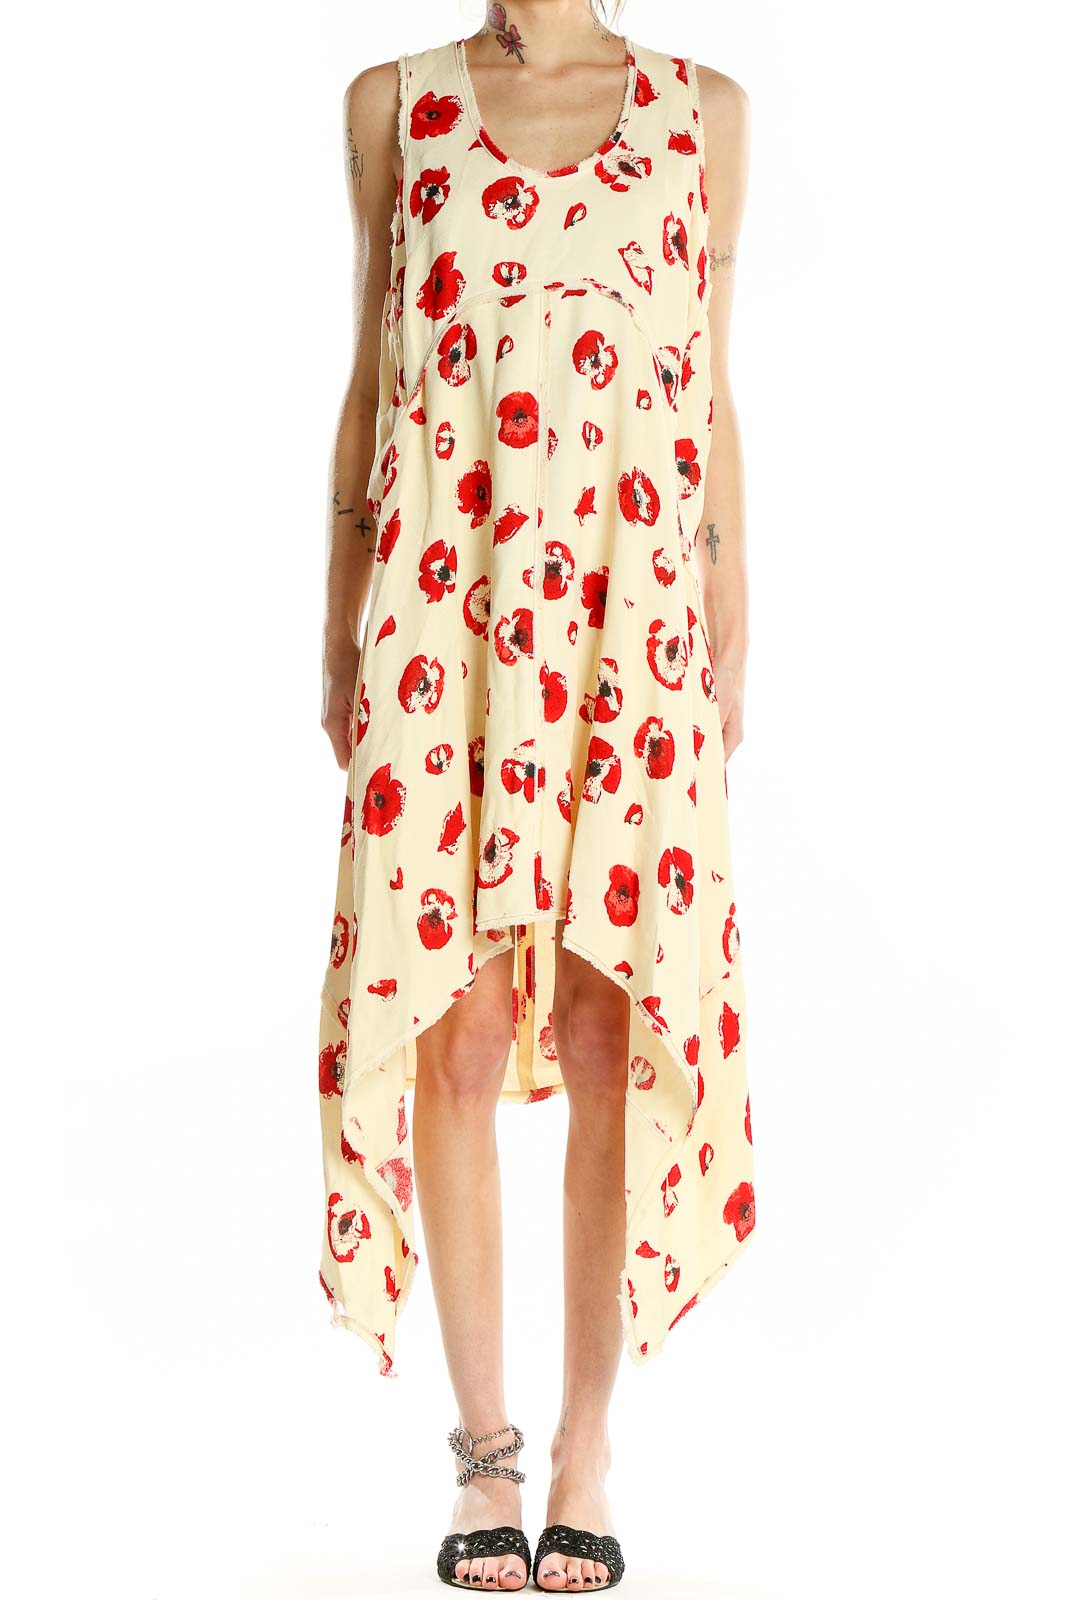 Red Cream Floral Print Sleeveless Dress Front